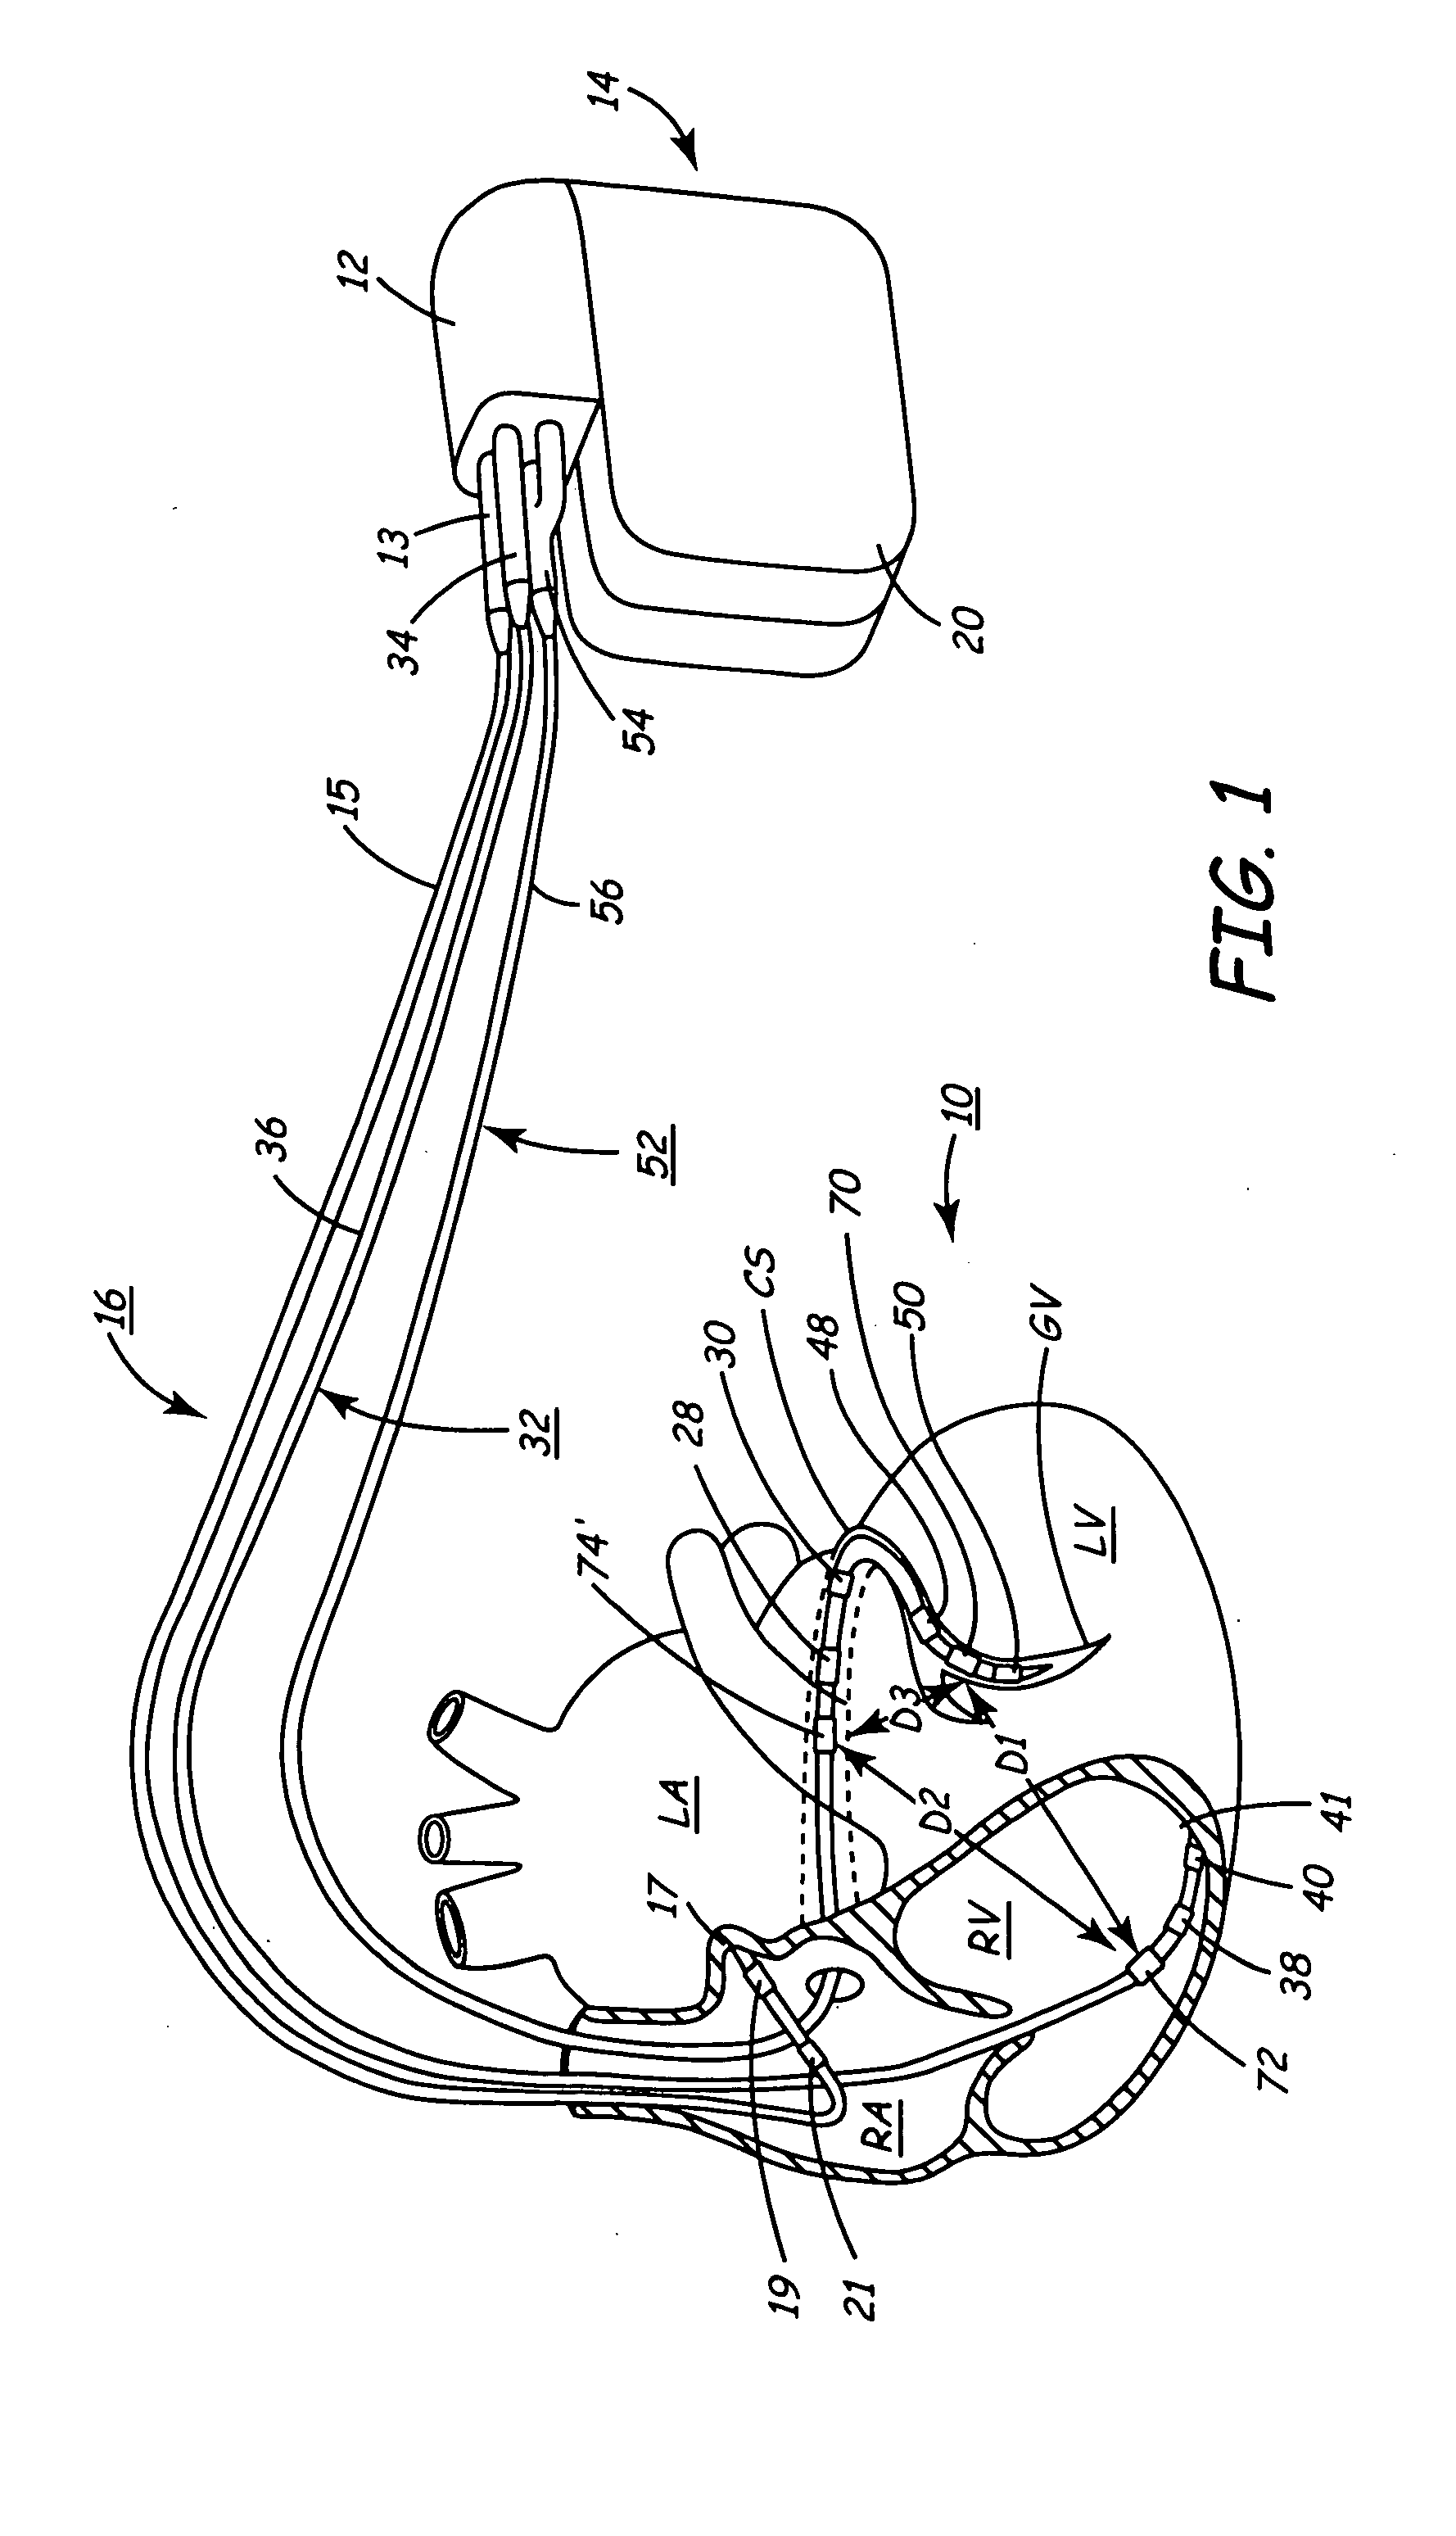 Implantable medical device for monitoring cardiac blood pressure and chamber dimension